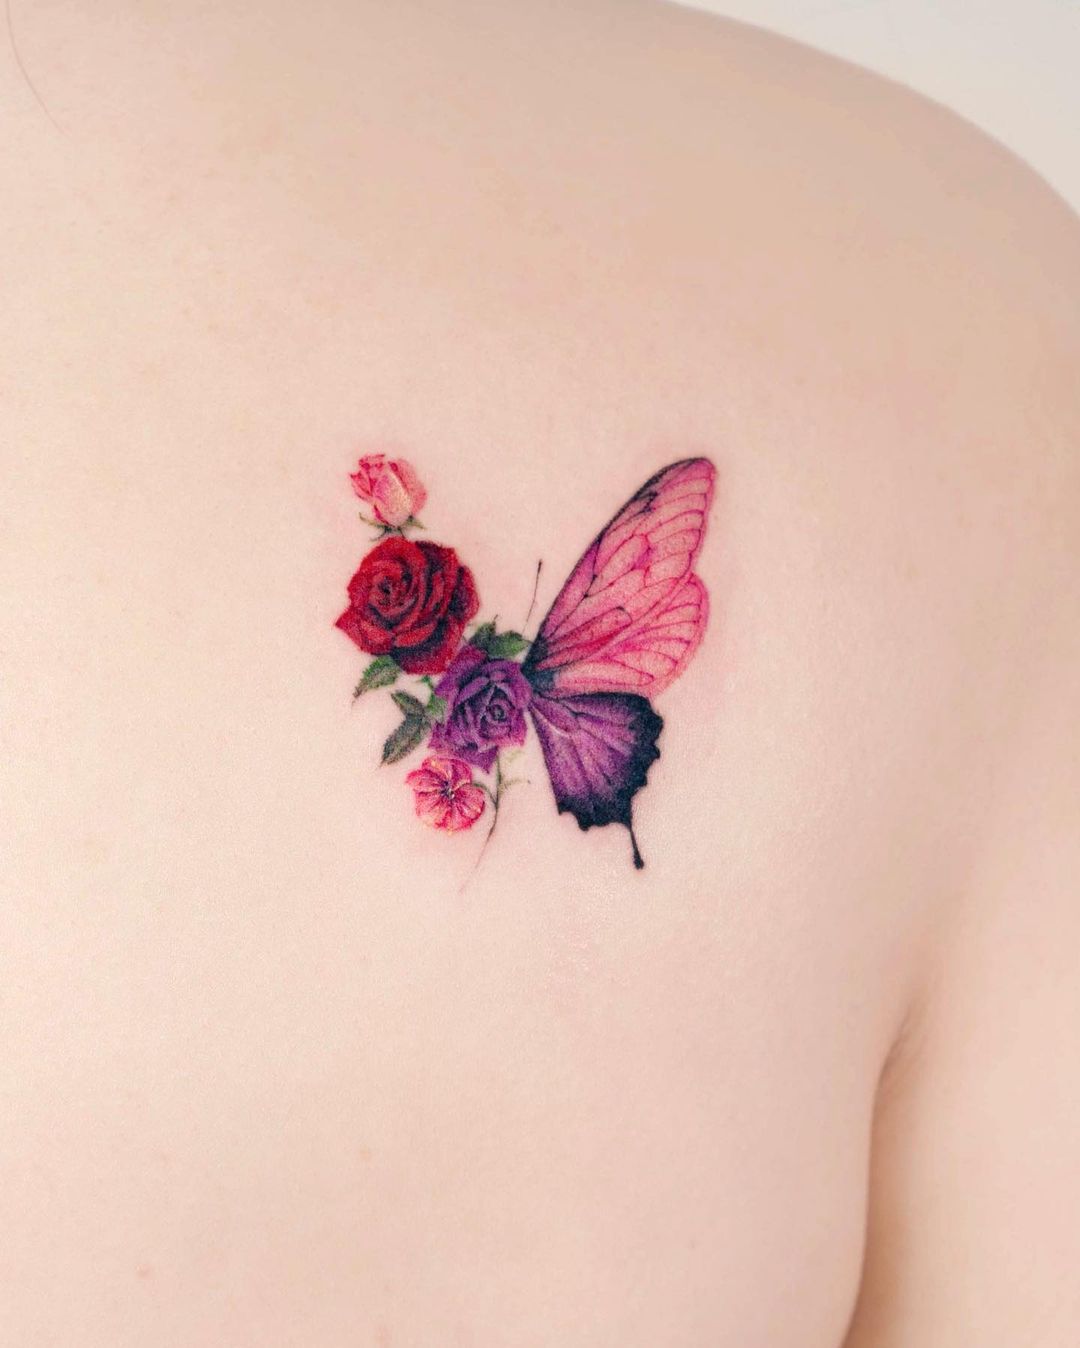 Red Rose and Butterfly Tattoo on Shoulder